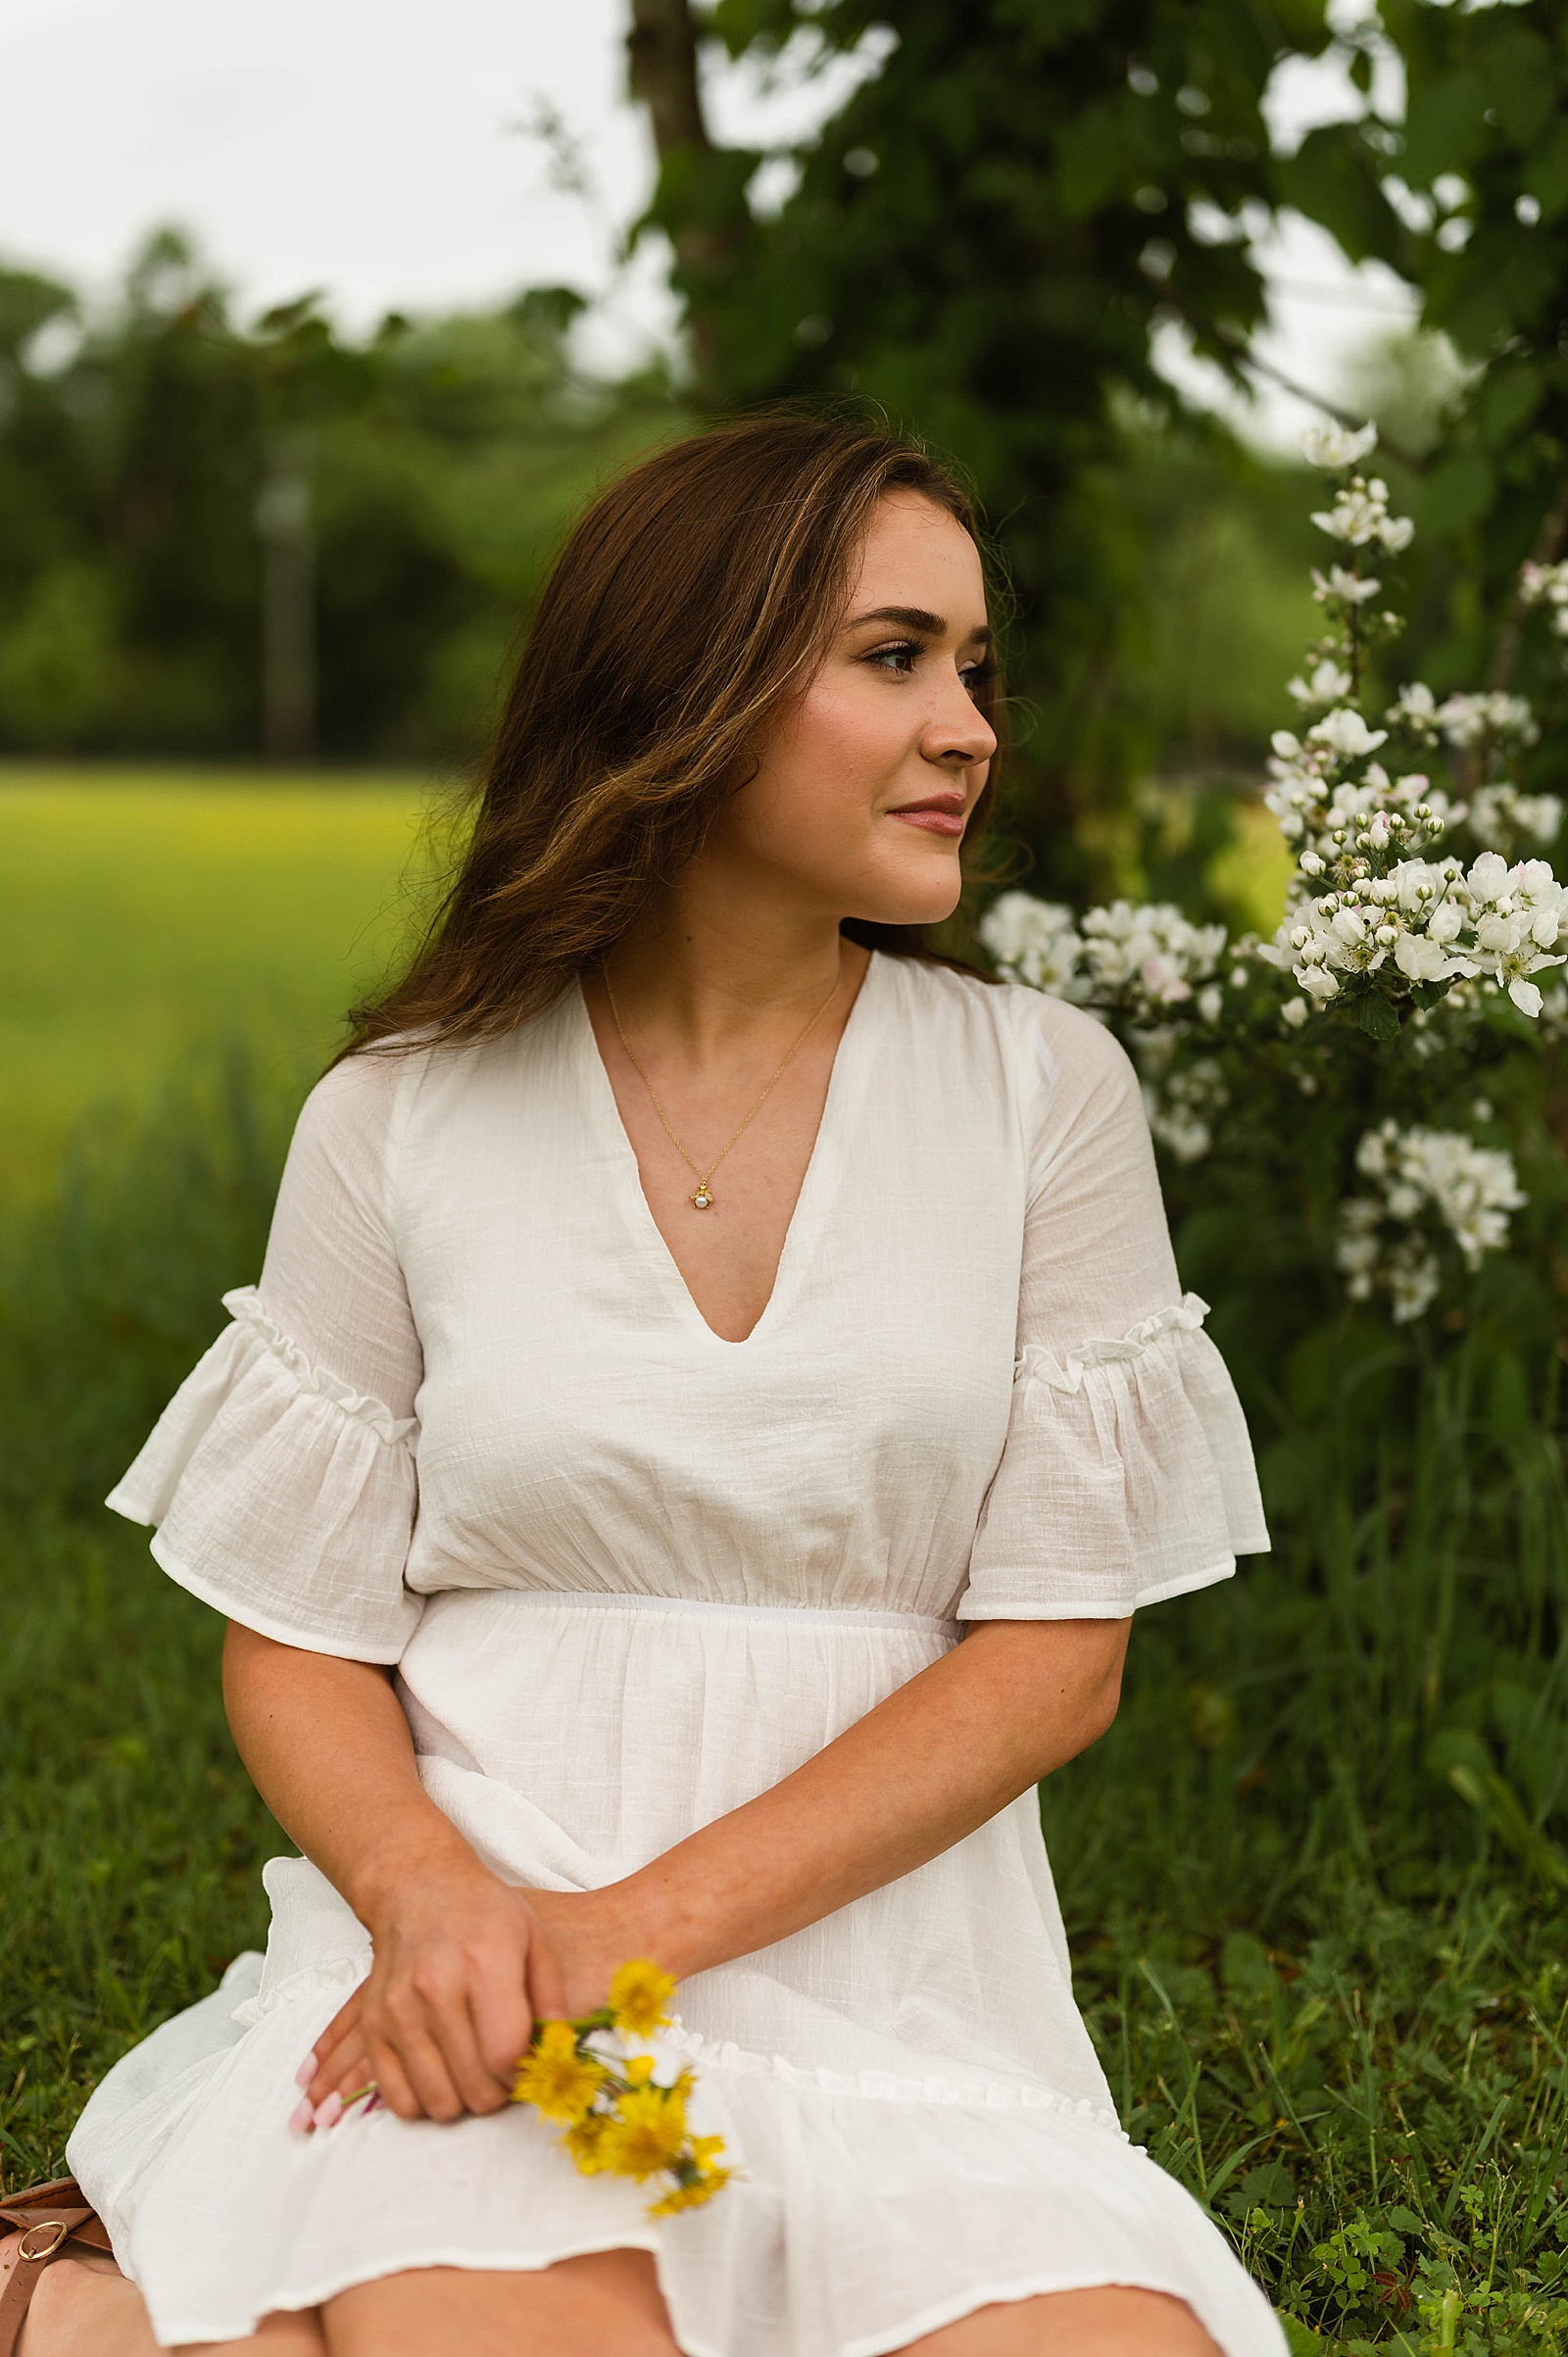 Brunette woman in white dress next to blossoming tree for Spring Flowers portraits